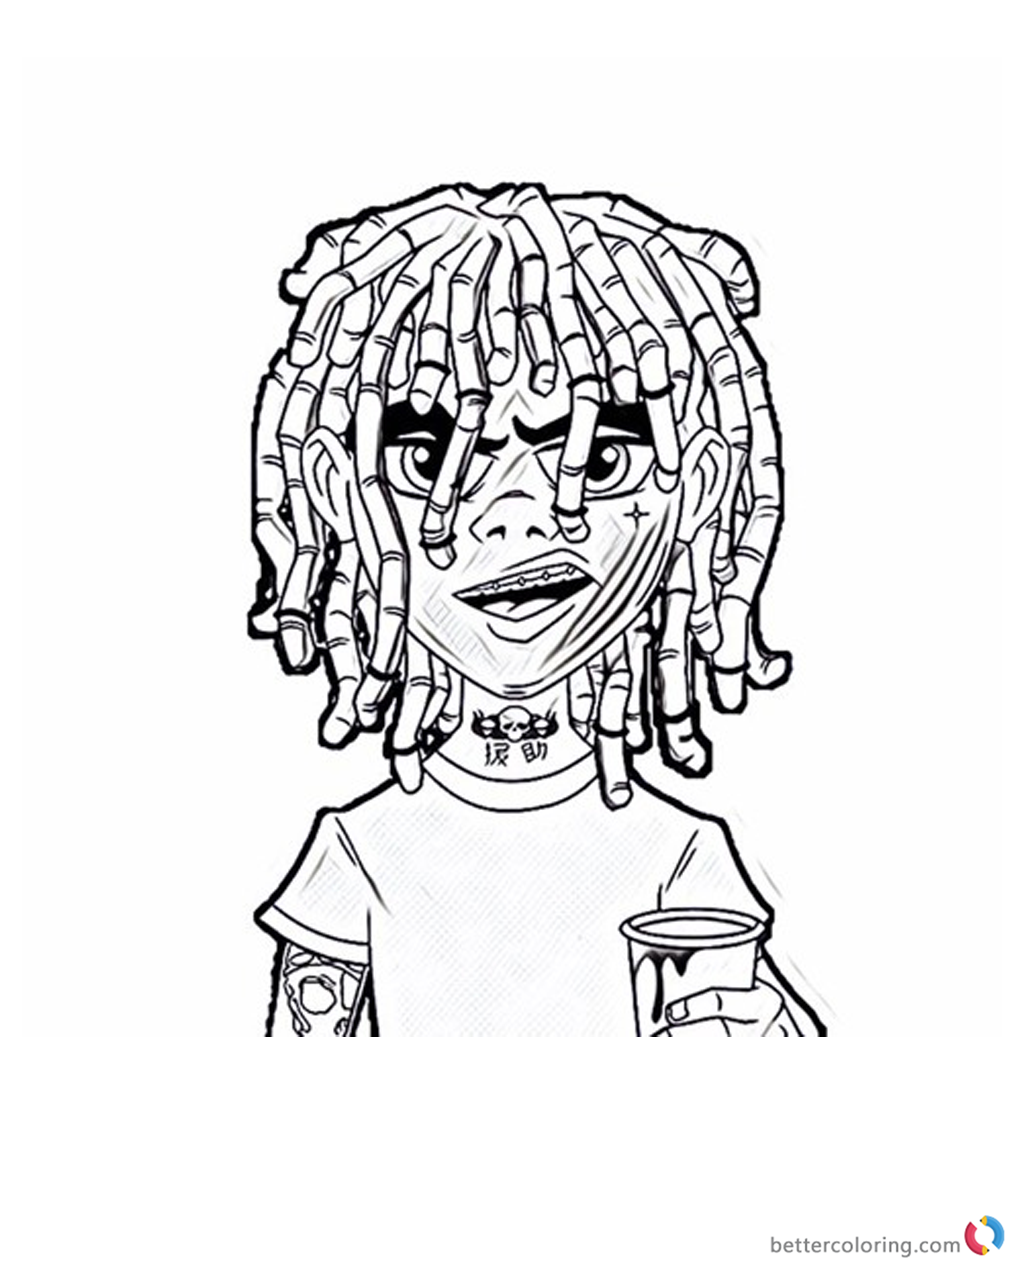 Cute Lil Pump Coloring Pages - Free Printable Coloring Pages | Lil pump,  Free printable coloring pages, Coloring pages